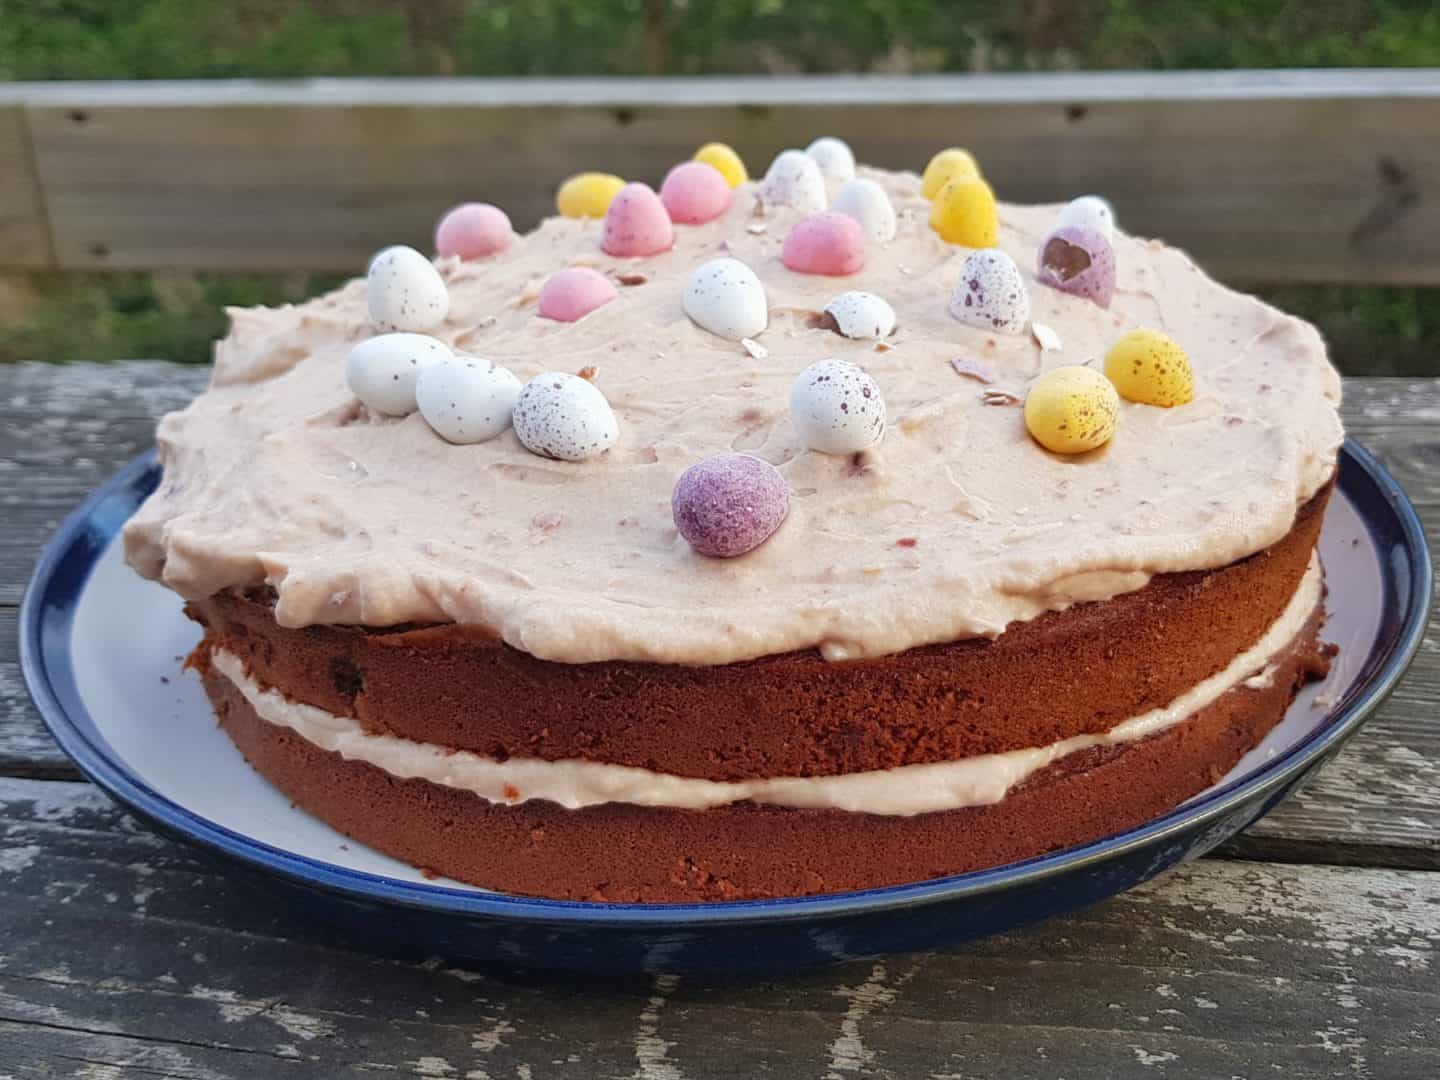 Chocolate cake with icing in centre and on top and mini eggs decorating the top